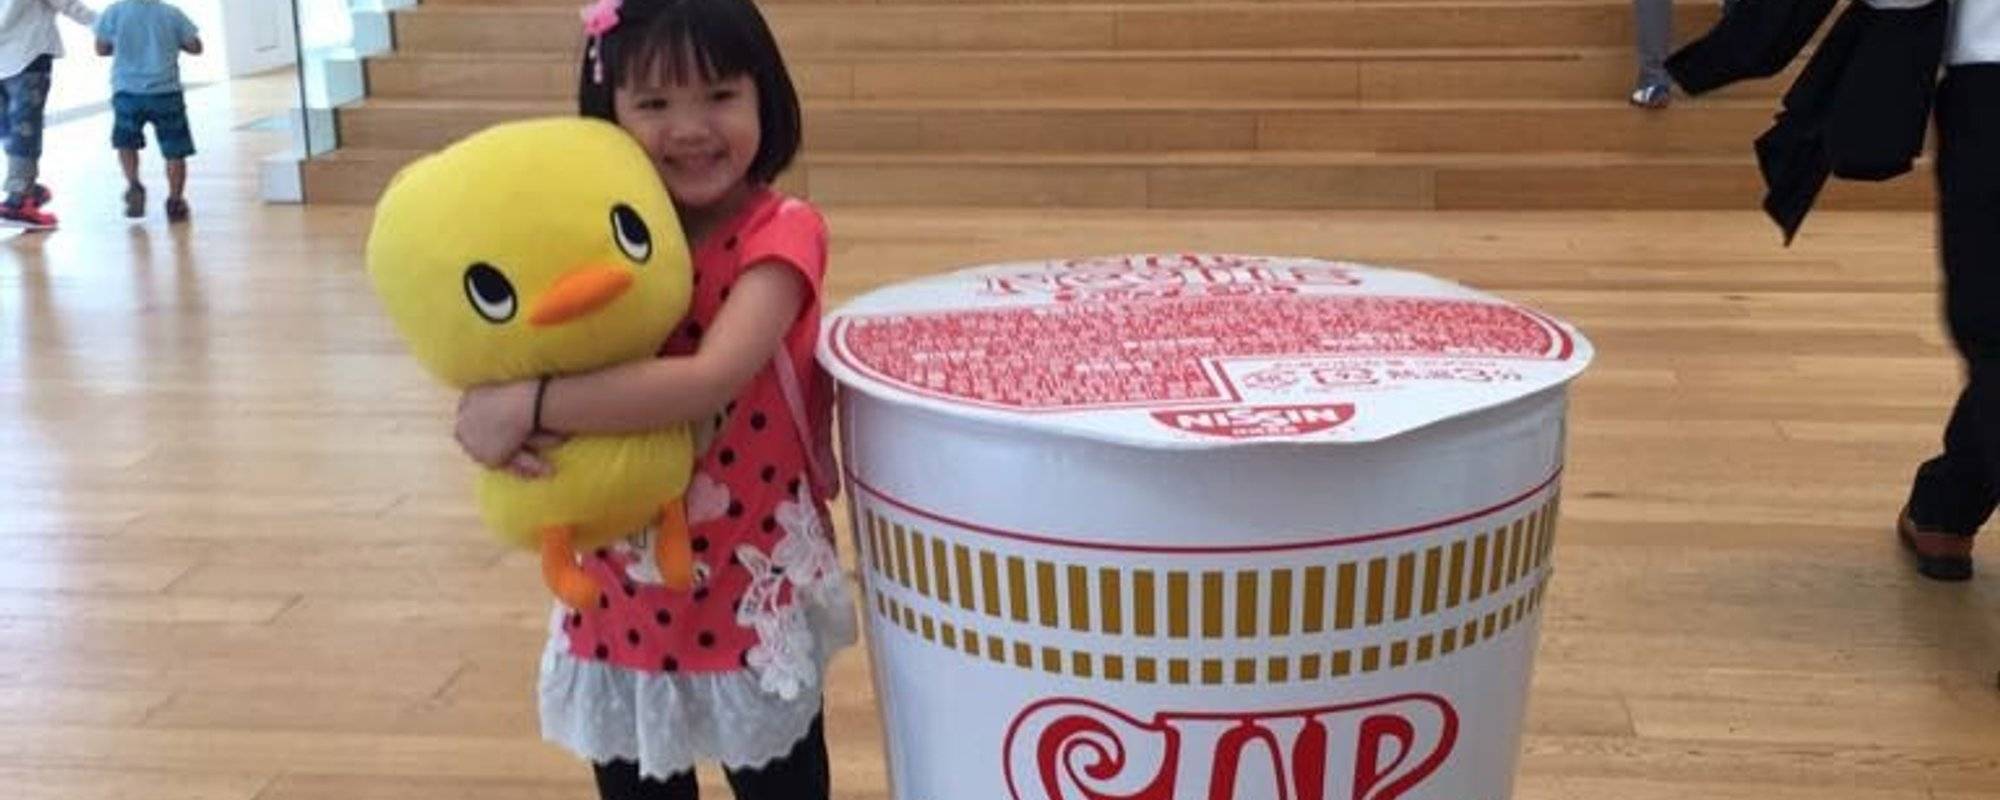 Cup Noodle Museum Yokohama - A fun and interactive museum for family